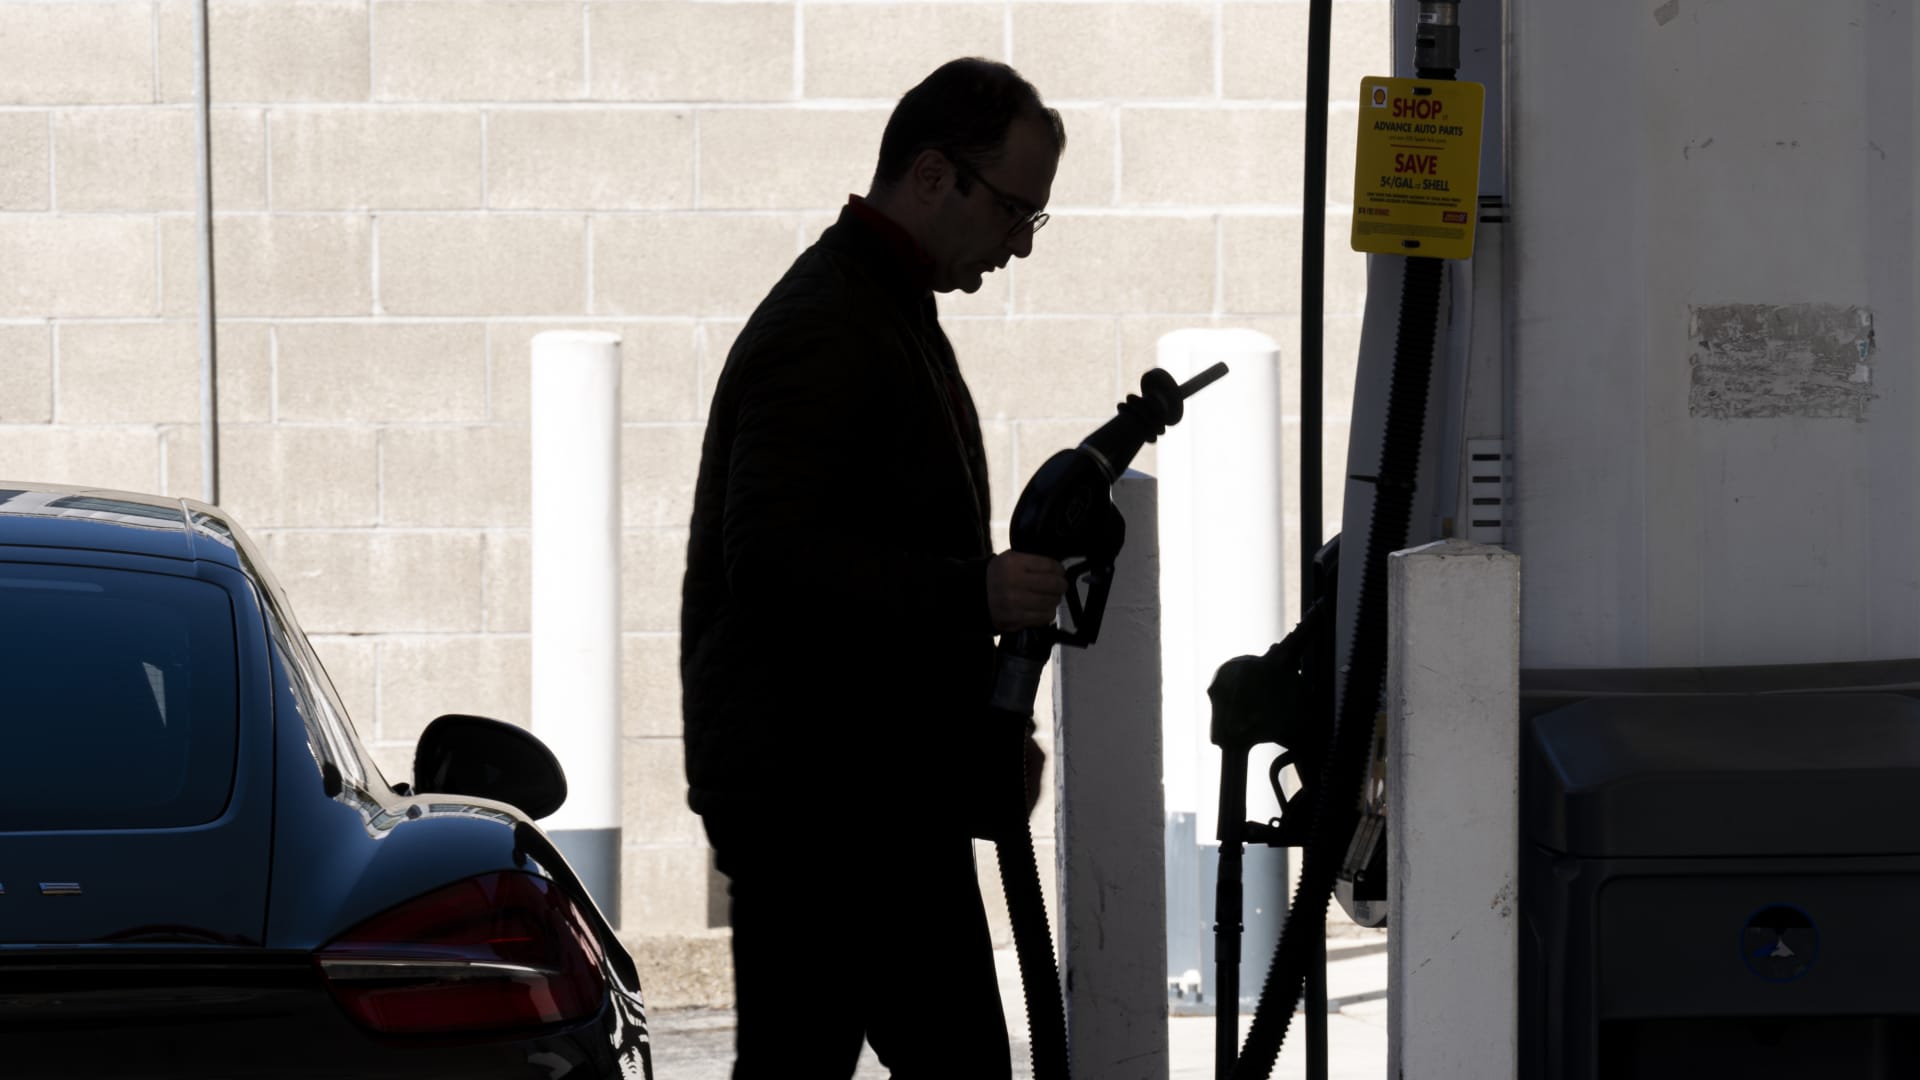 A driver removes a gas nozzle at a Shell gas station in San Francisco, California, U.S., on Friday, Feb. 25, 2022.